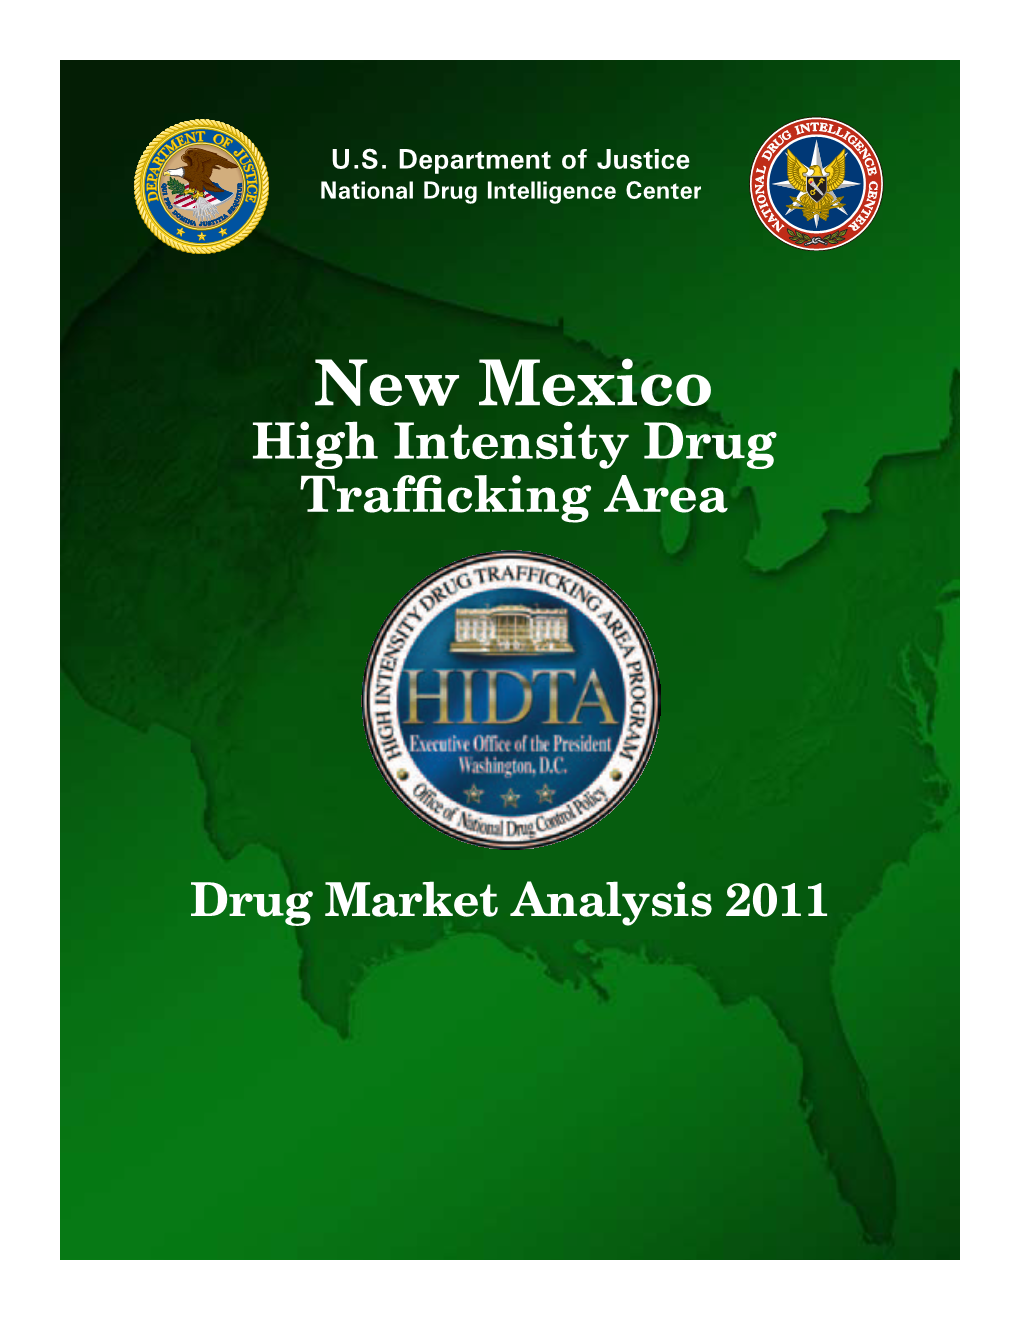 New Mexico High Intensity Drug Trafficking Area